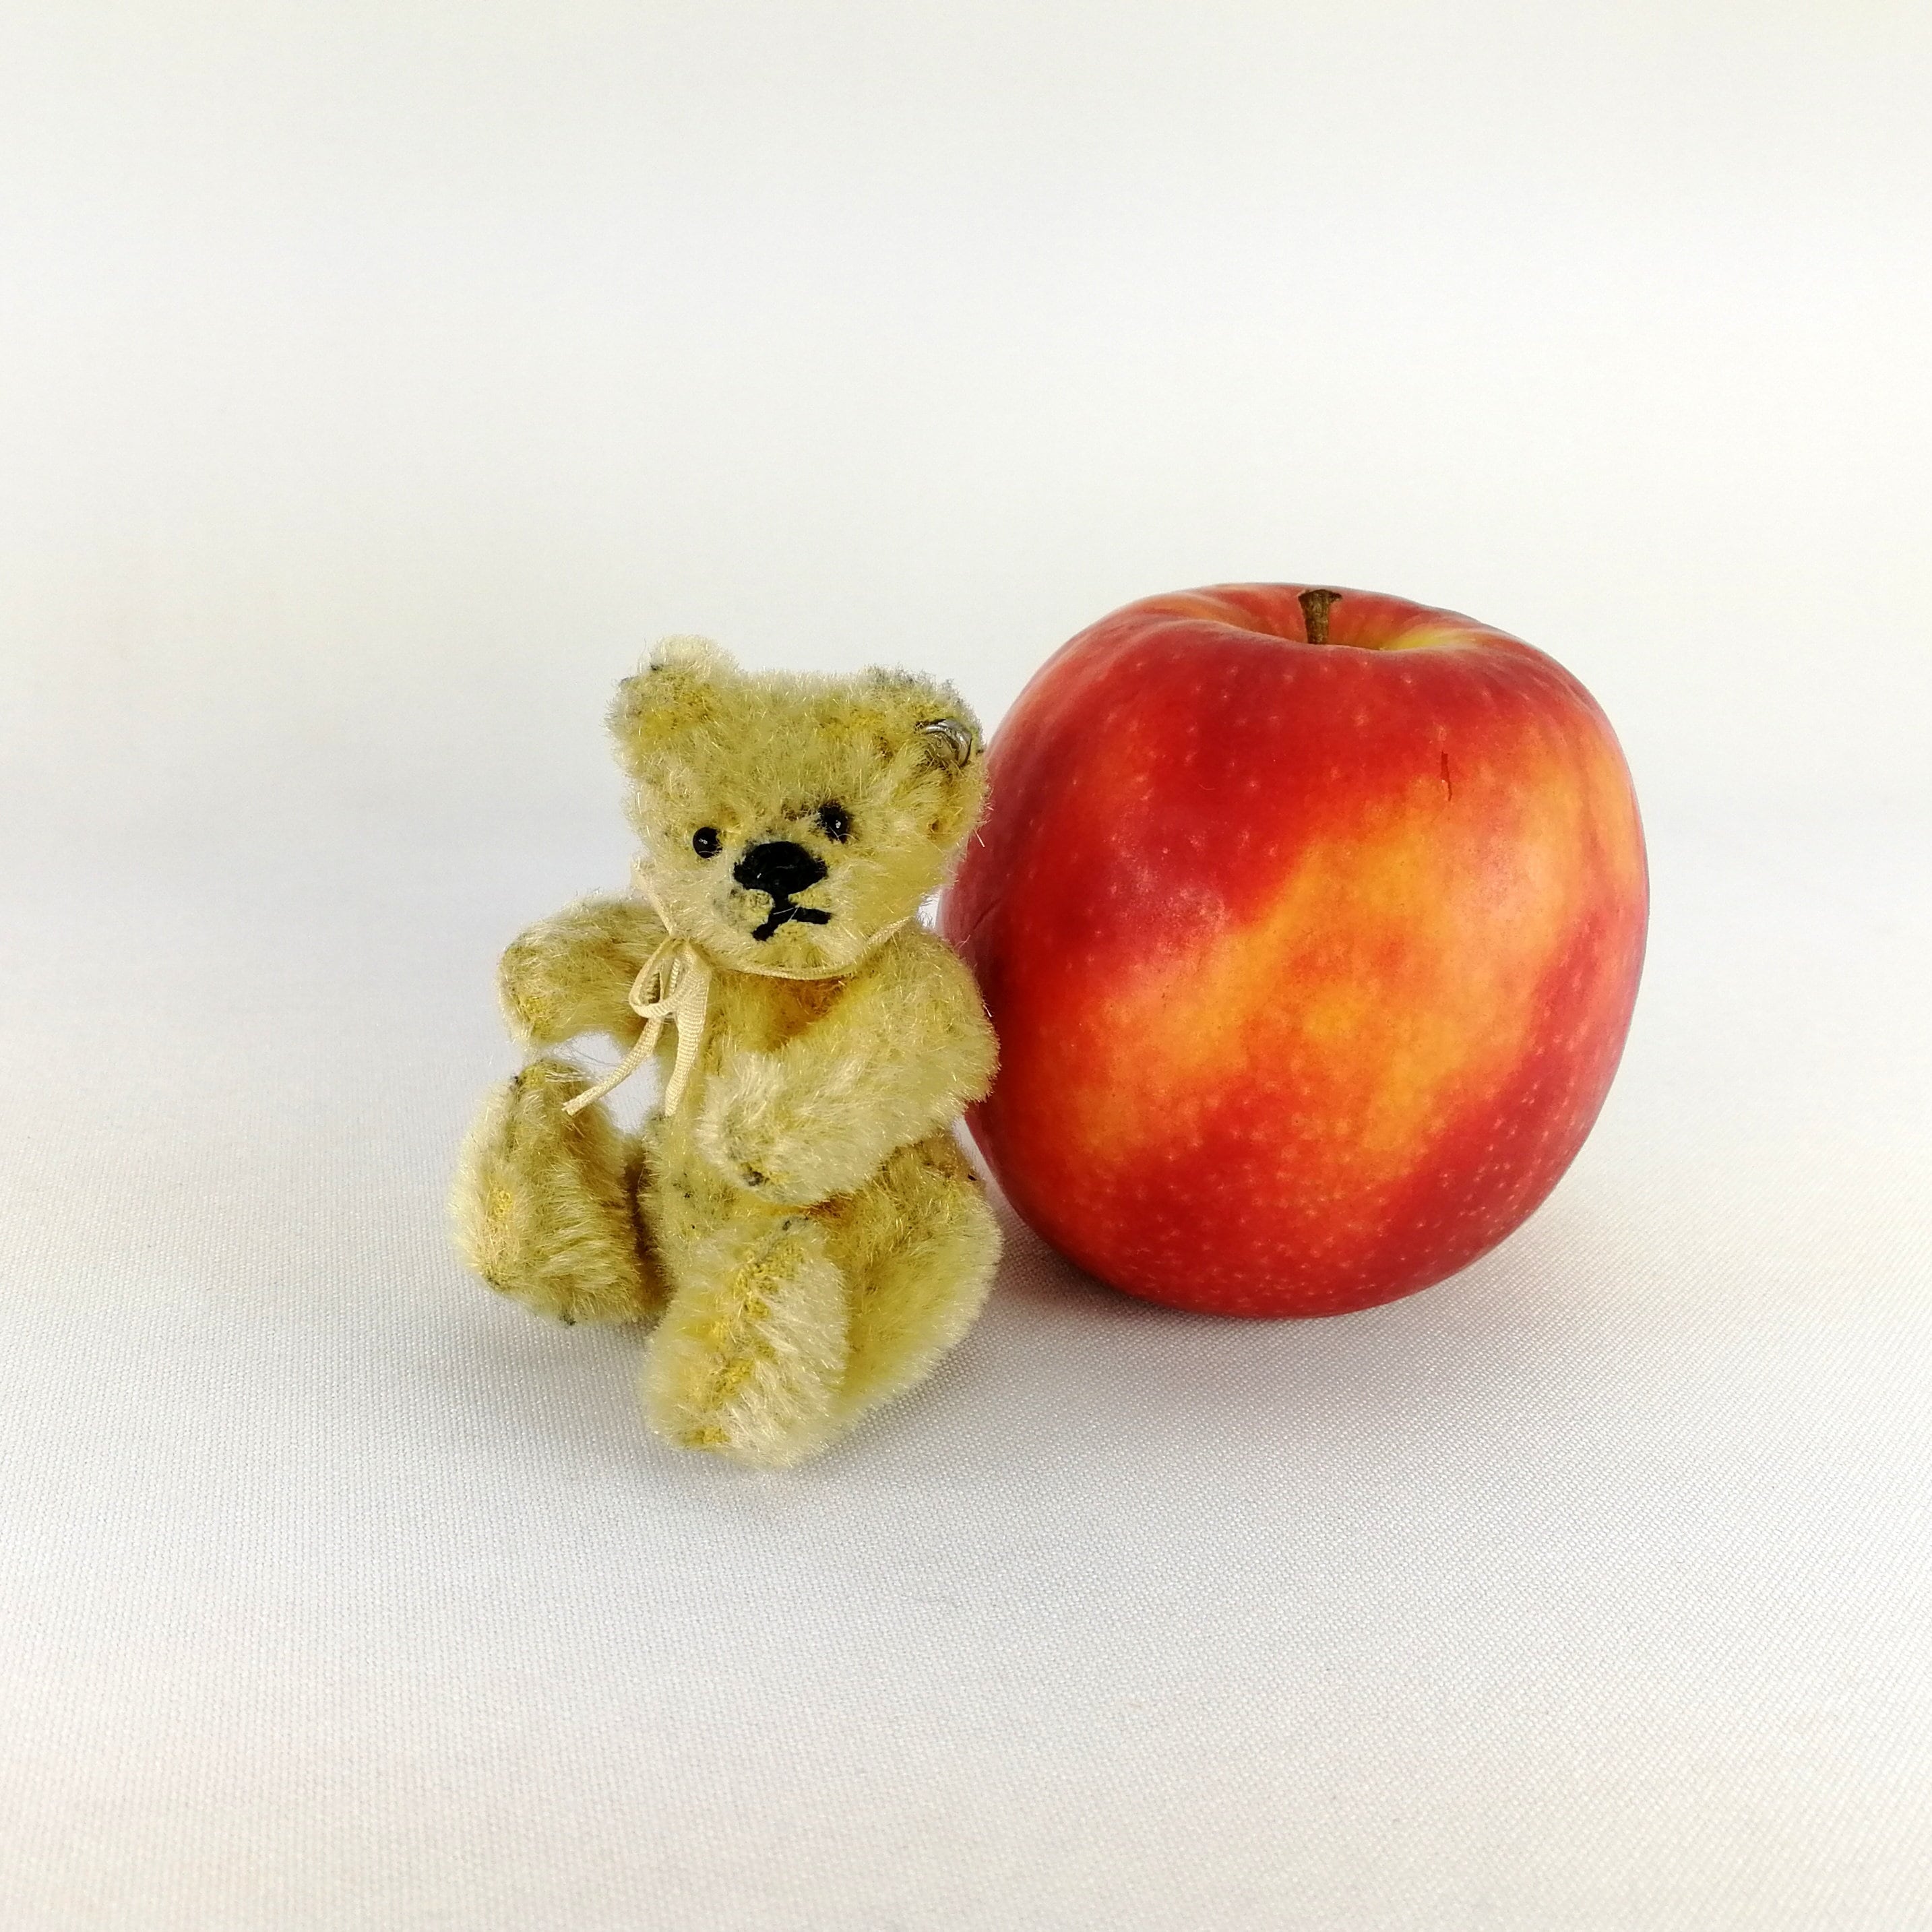 SOLD Miniature teddy bear 3 inches